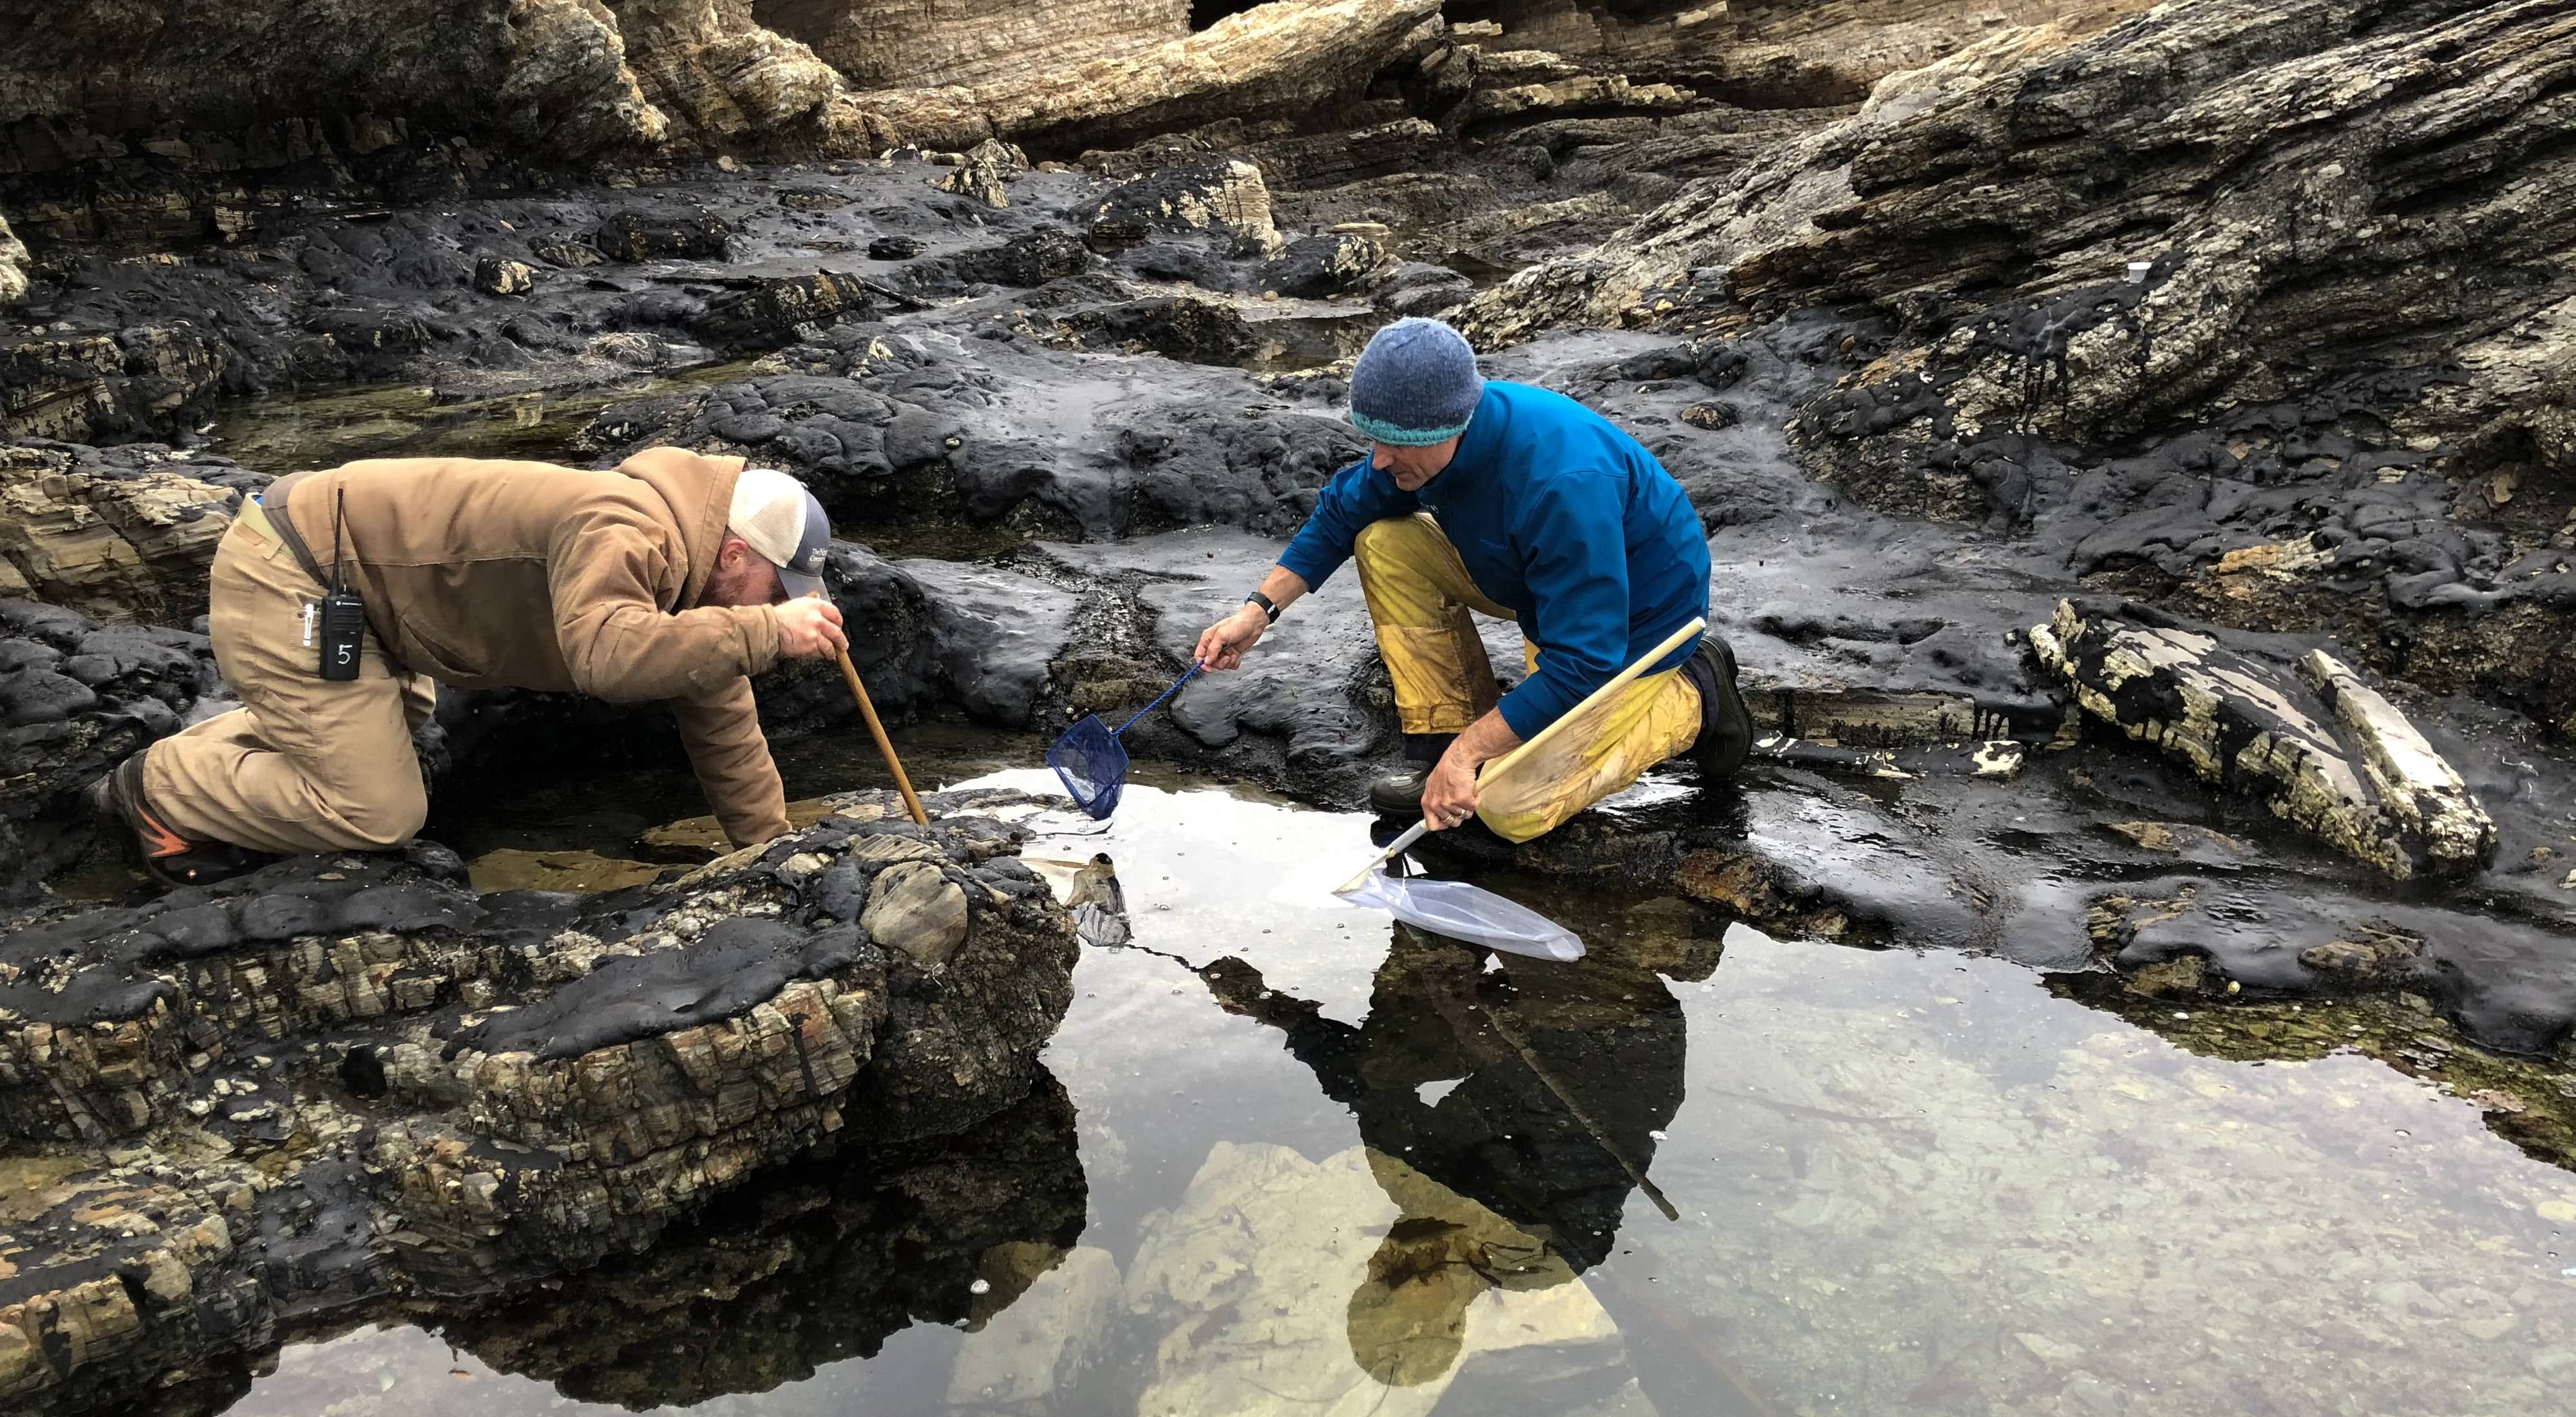 Two researchers leaning over a tidepool collecting samples with nets.